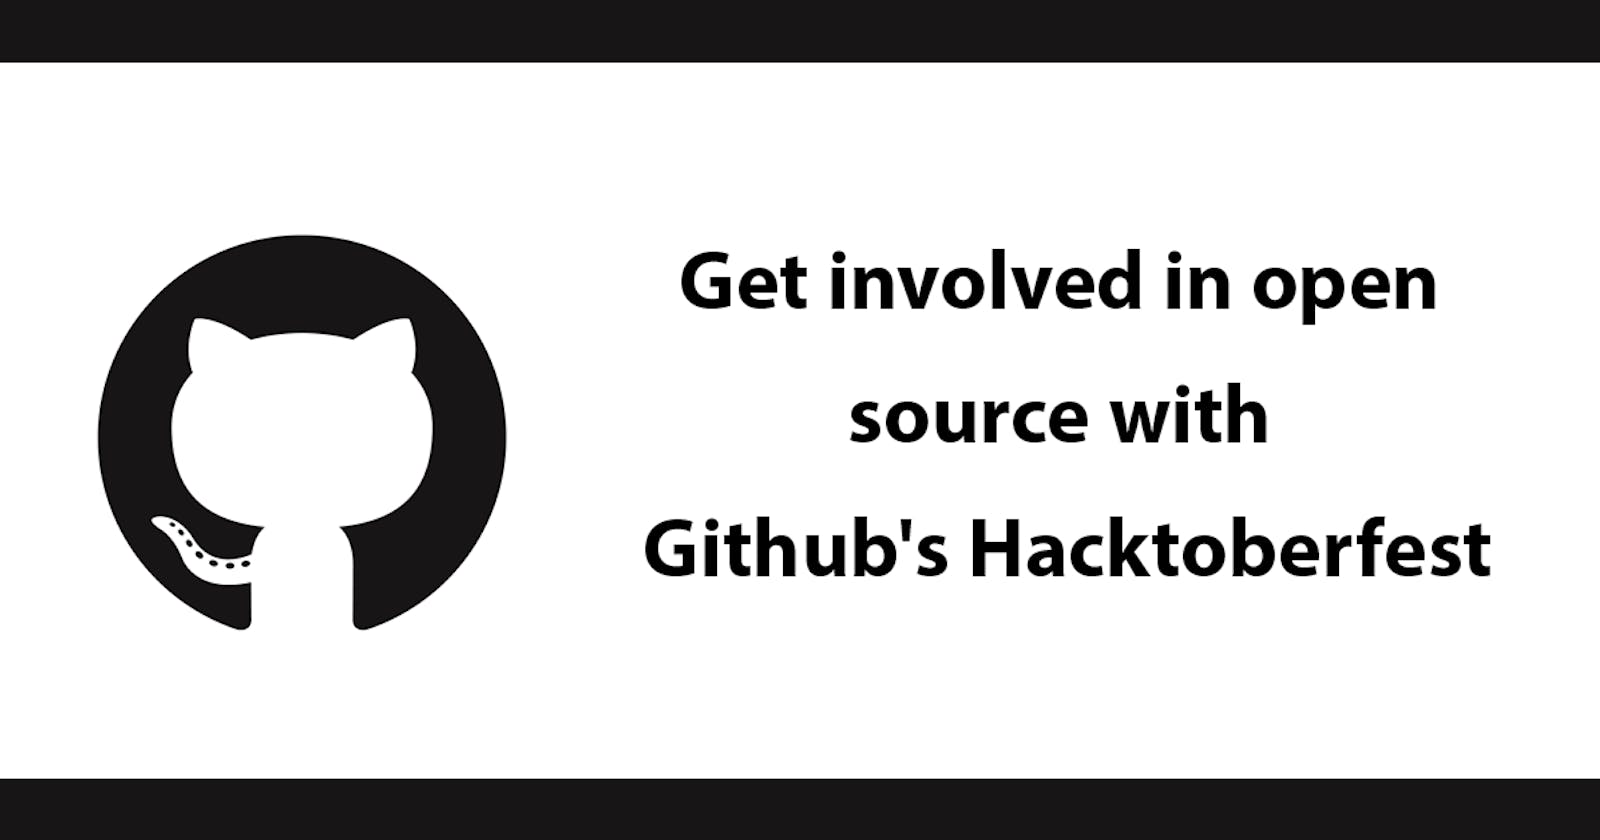 Get involved in open source with Github's Hacktoberfest